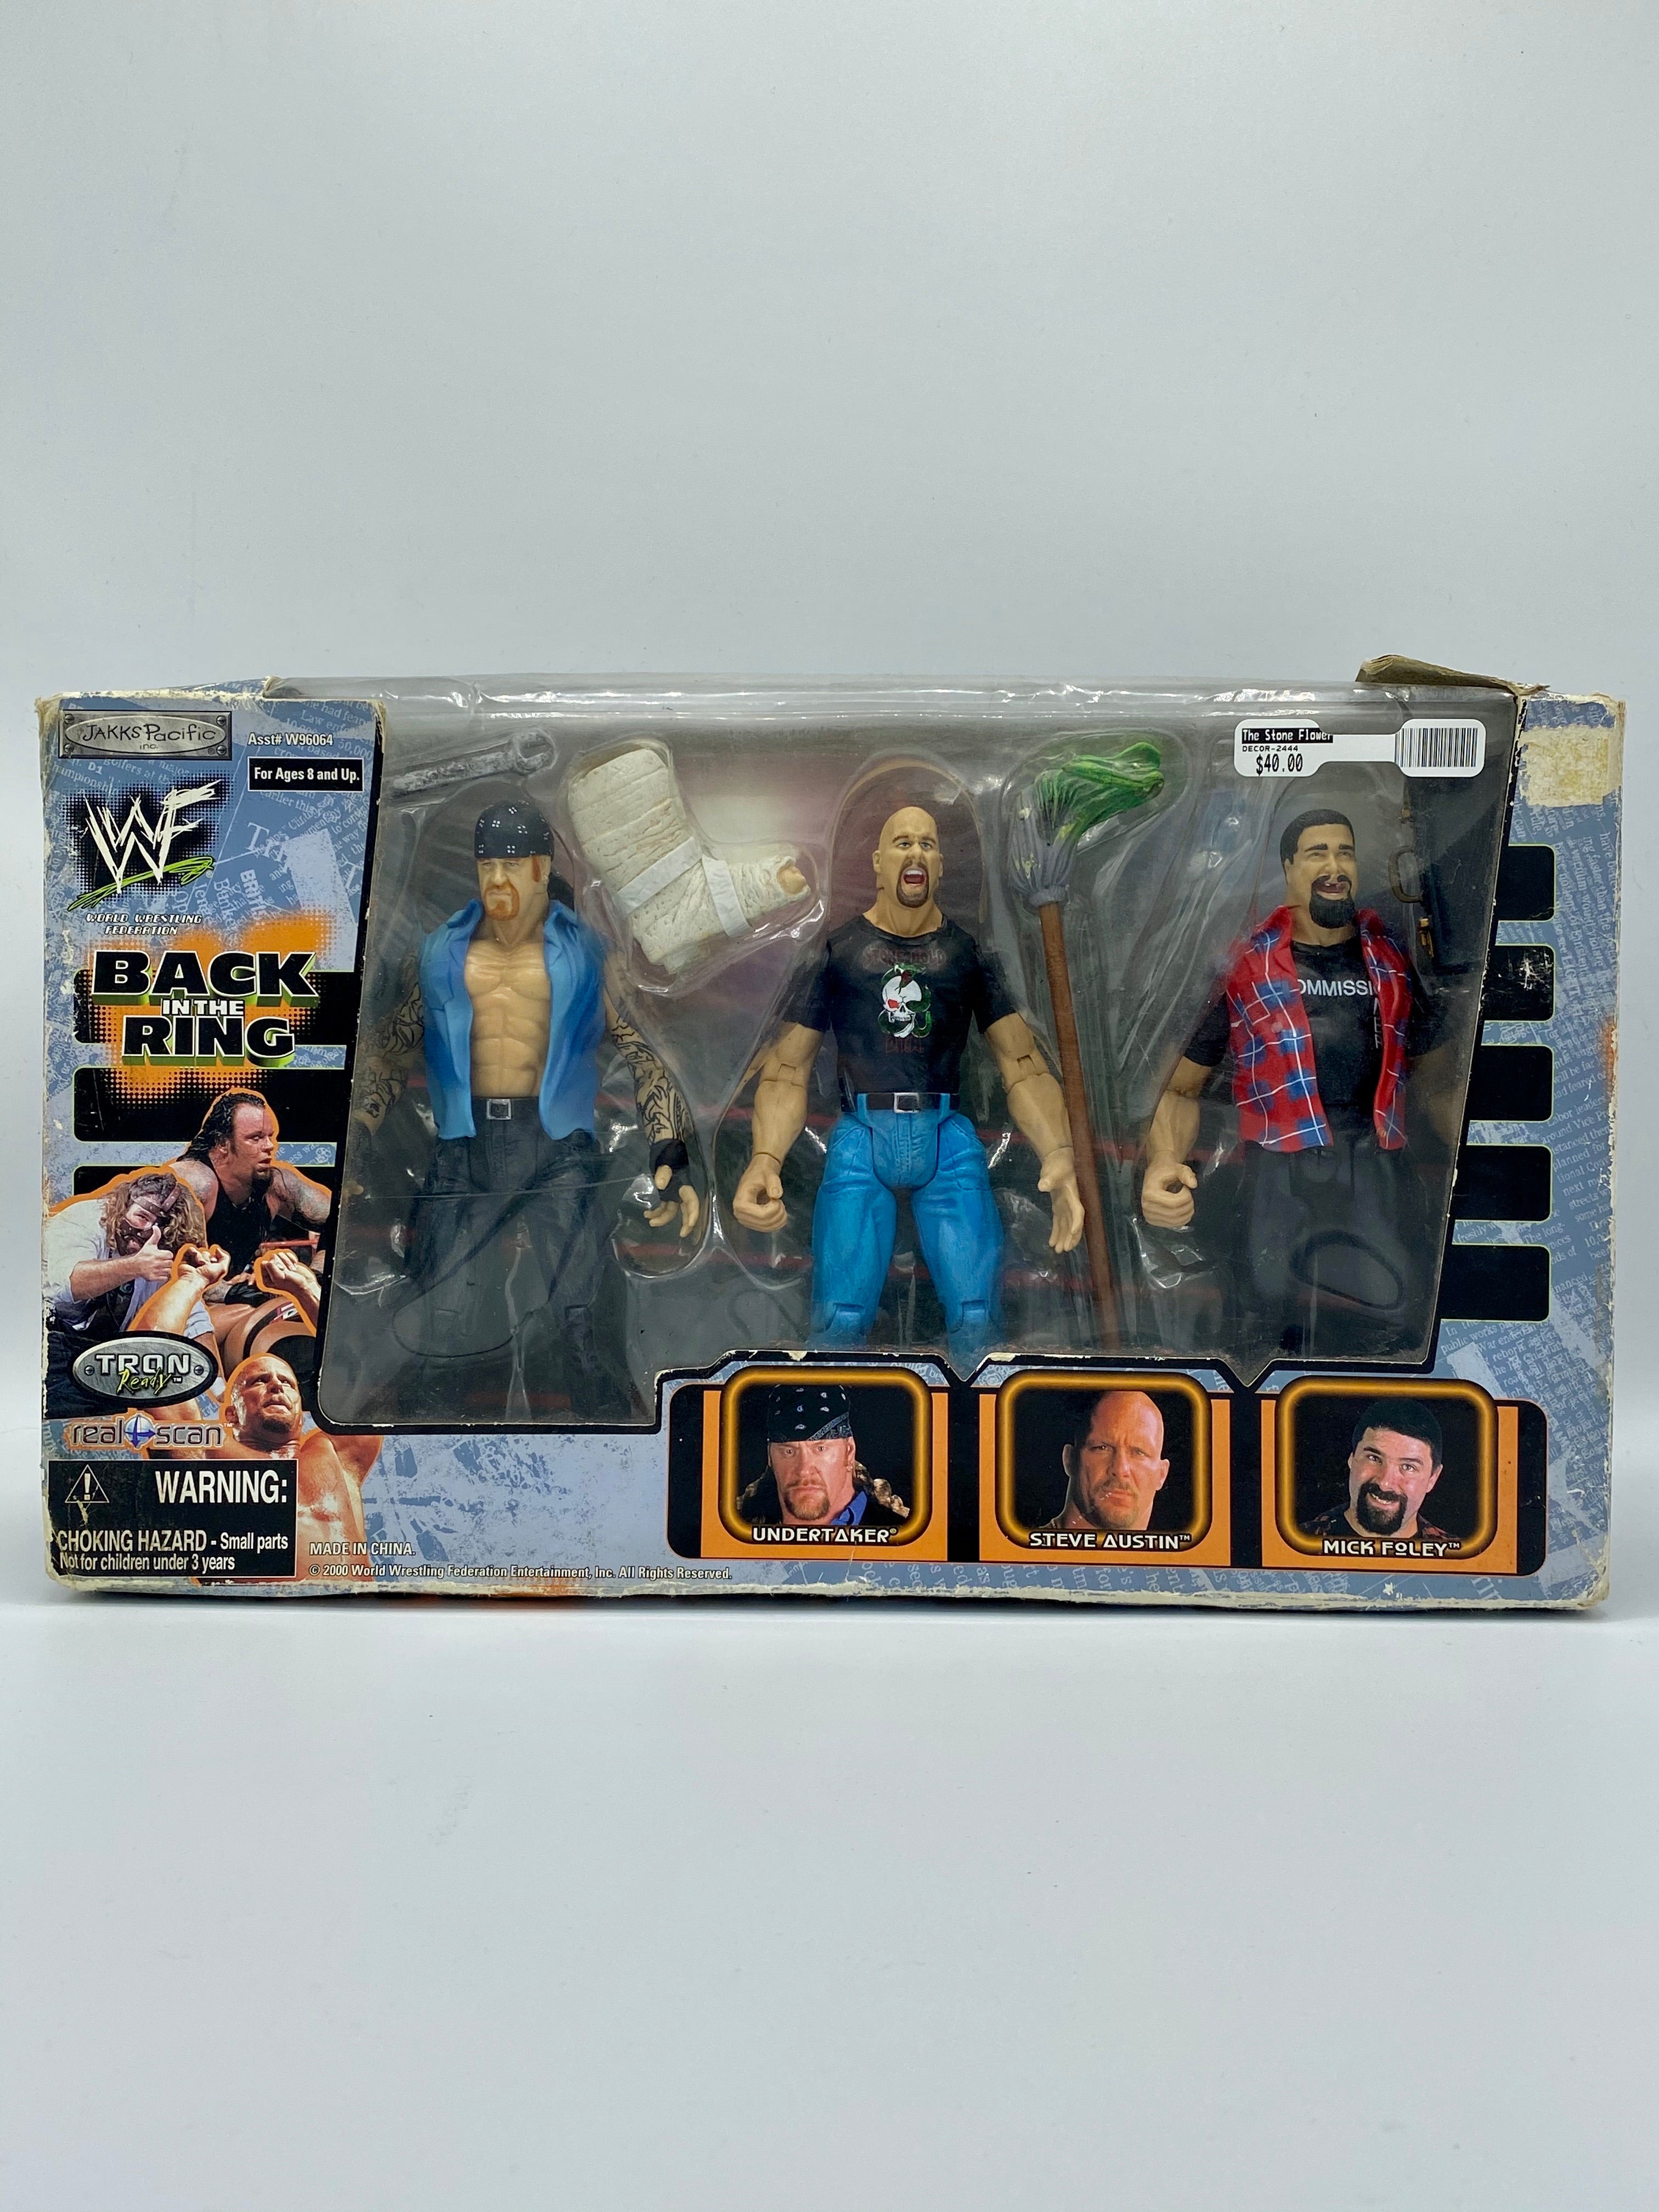 WWF Back in the Ring Wrestling Action Figure 3 pack